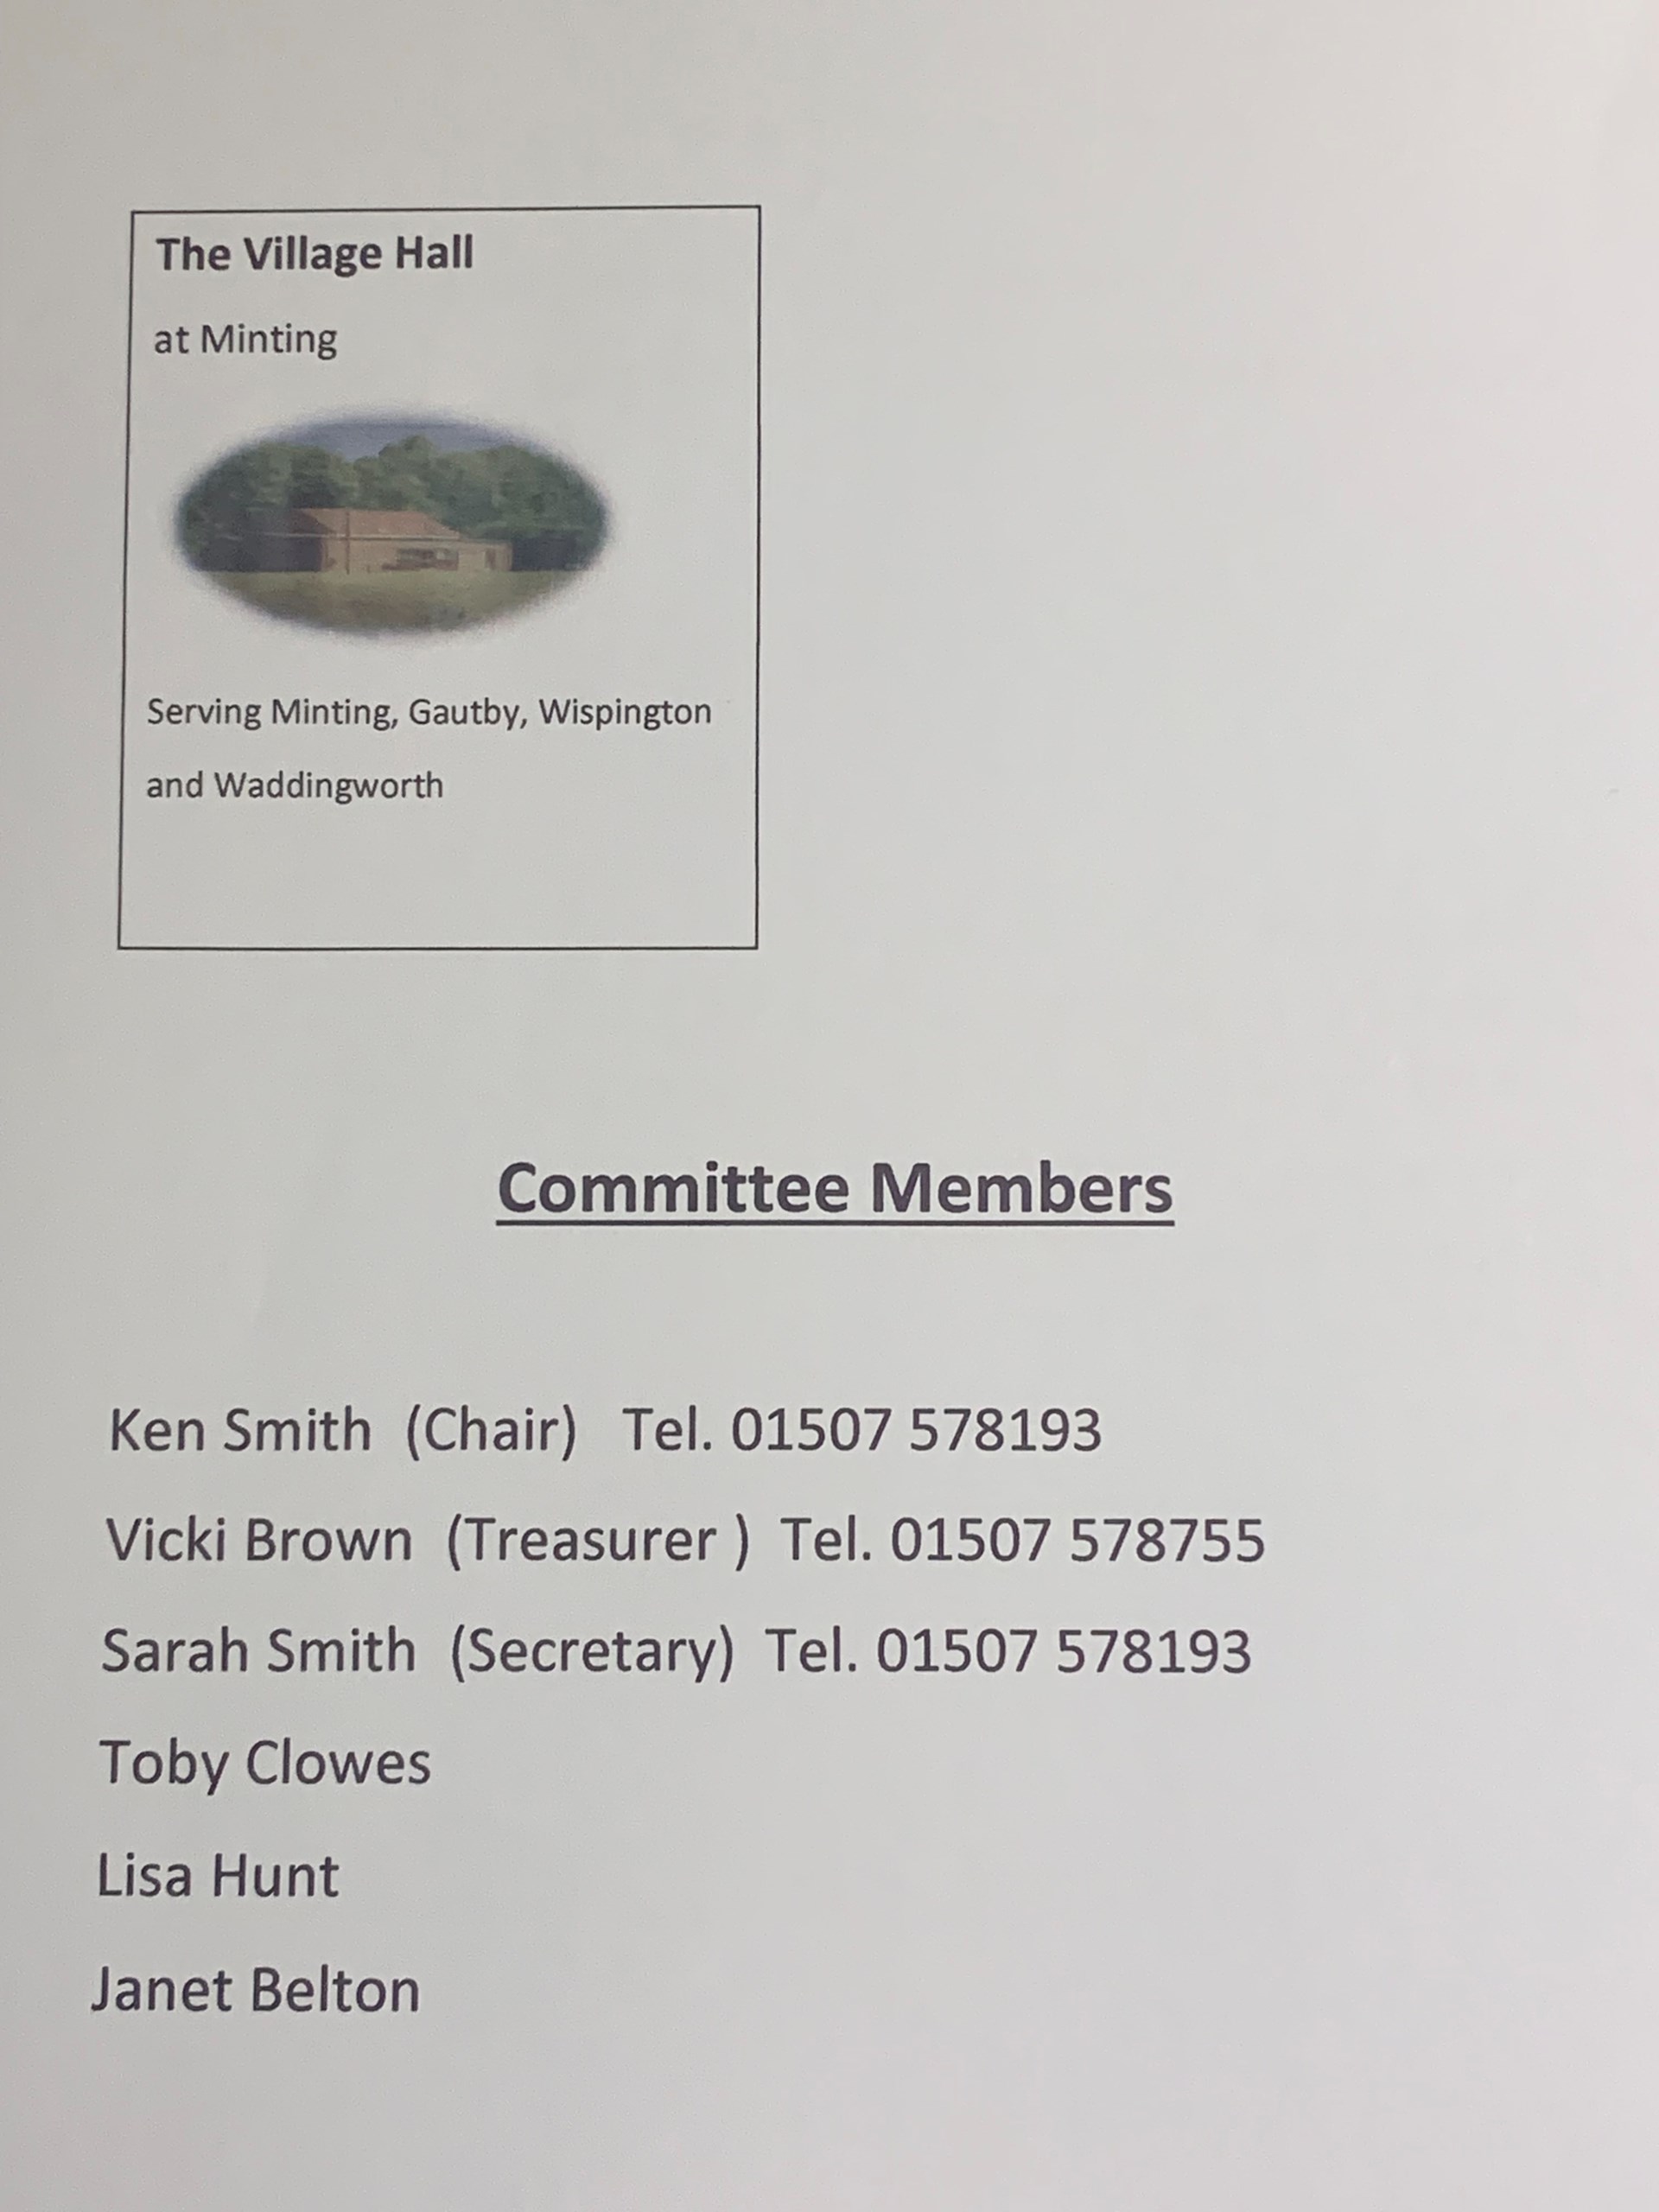 The Village Hall at Minting Committee Members